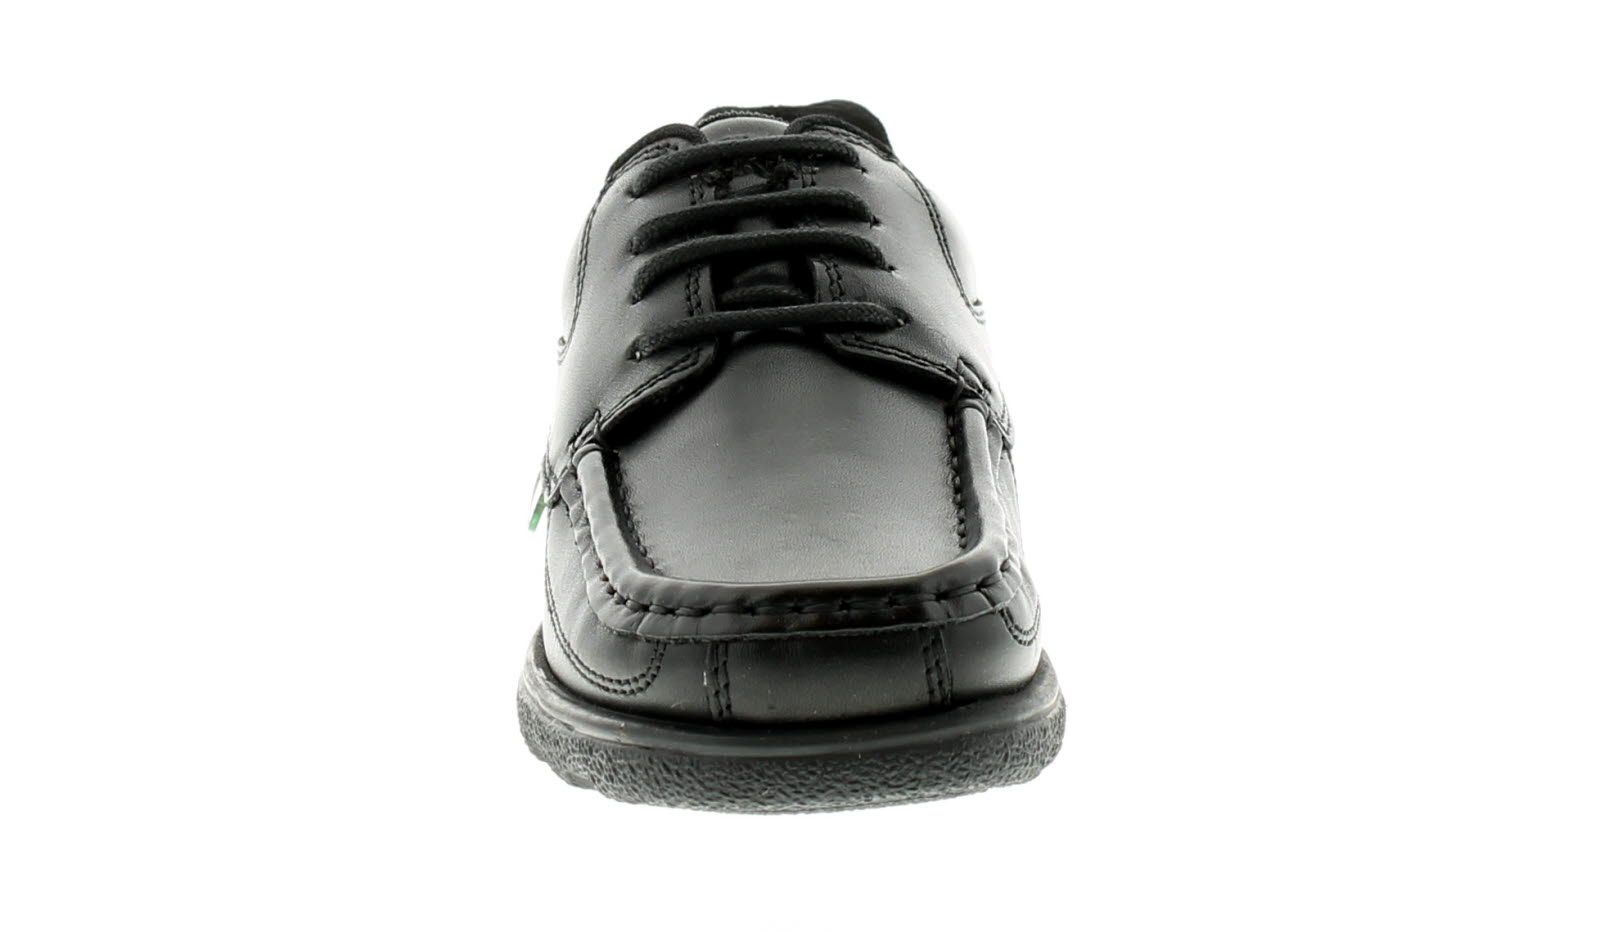 Kickers Fragma Lace 3 Junior Boys Shoes in Black